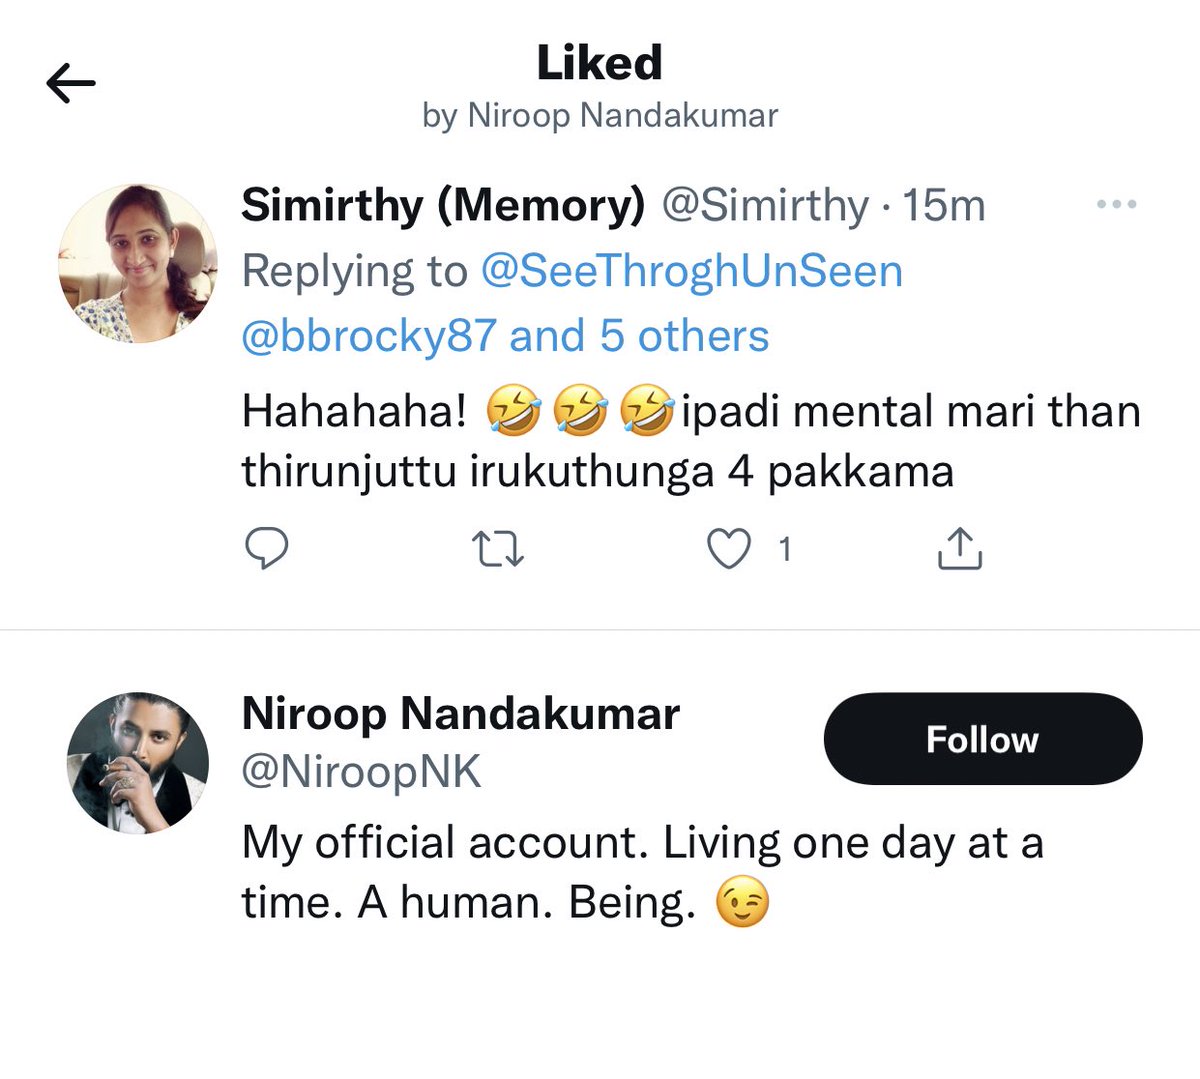 Adi sakkanana Niroop liking comment when arguement is gg on with his & bala fans.
As a celebrity with ethics: 
Ask all to stop or Ignore it. 
Bad example is to like the tweet just like how anitha husband did. #BBUltimateTamil #BBUltimate #BiggBossUltimateTamil #BiggBossUltimate